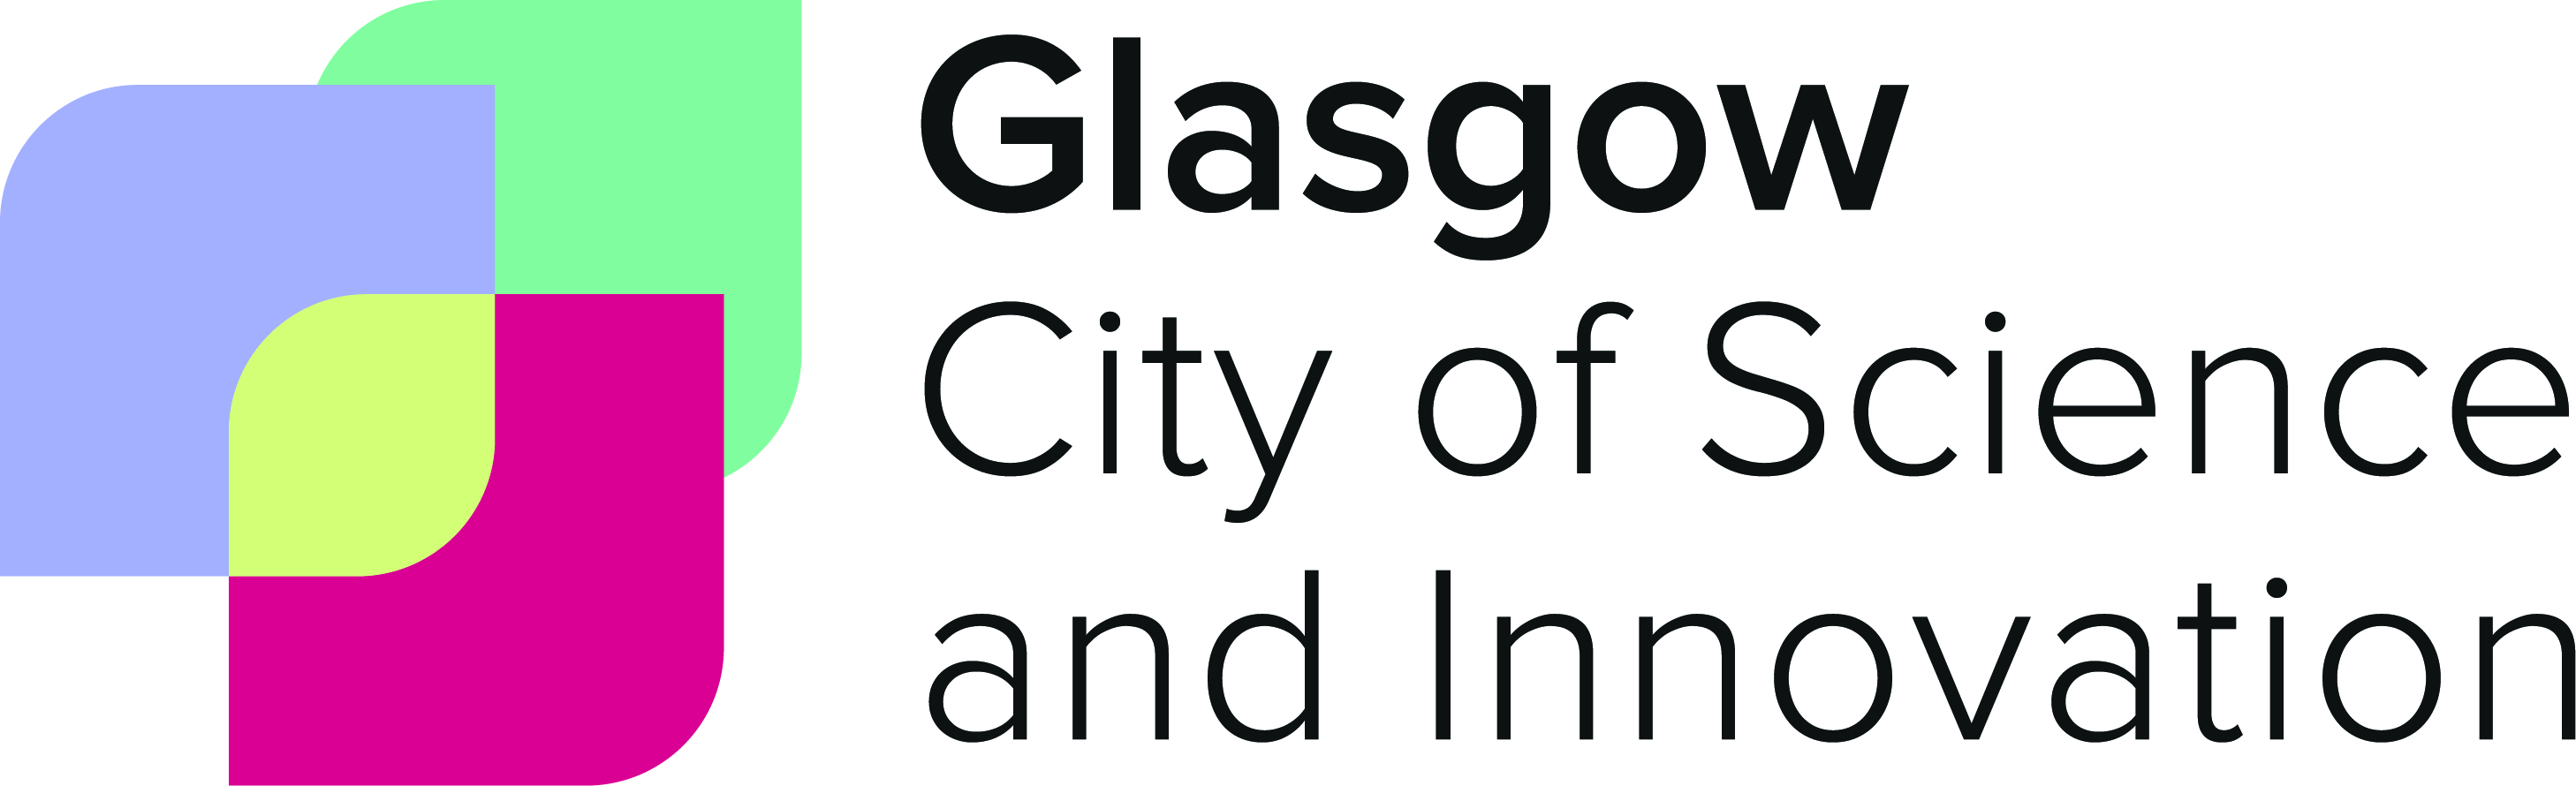 The logo of Glasgow City of Science